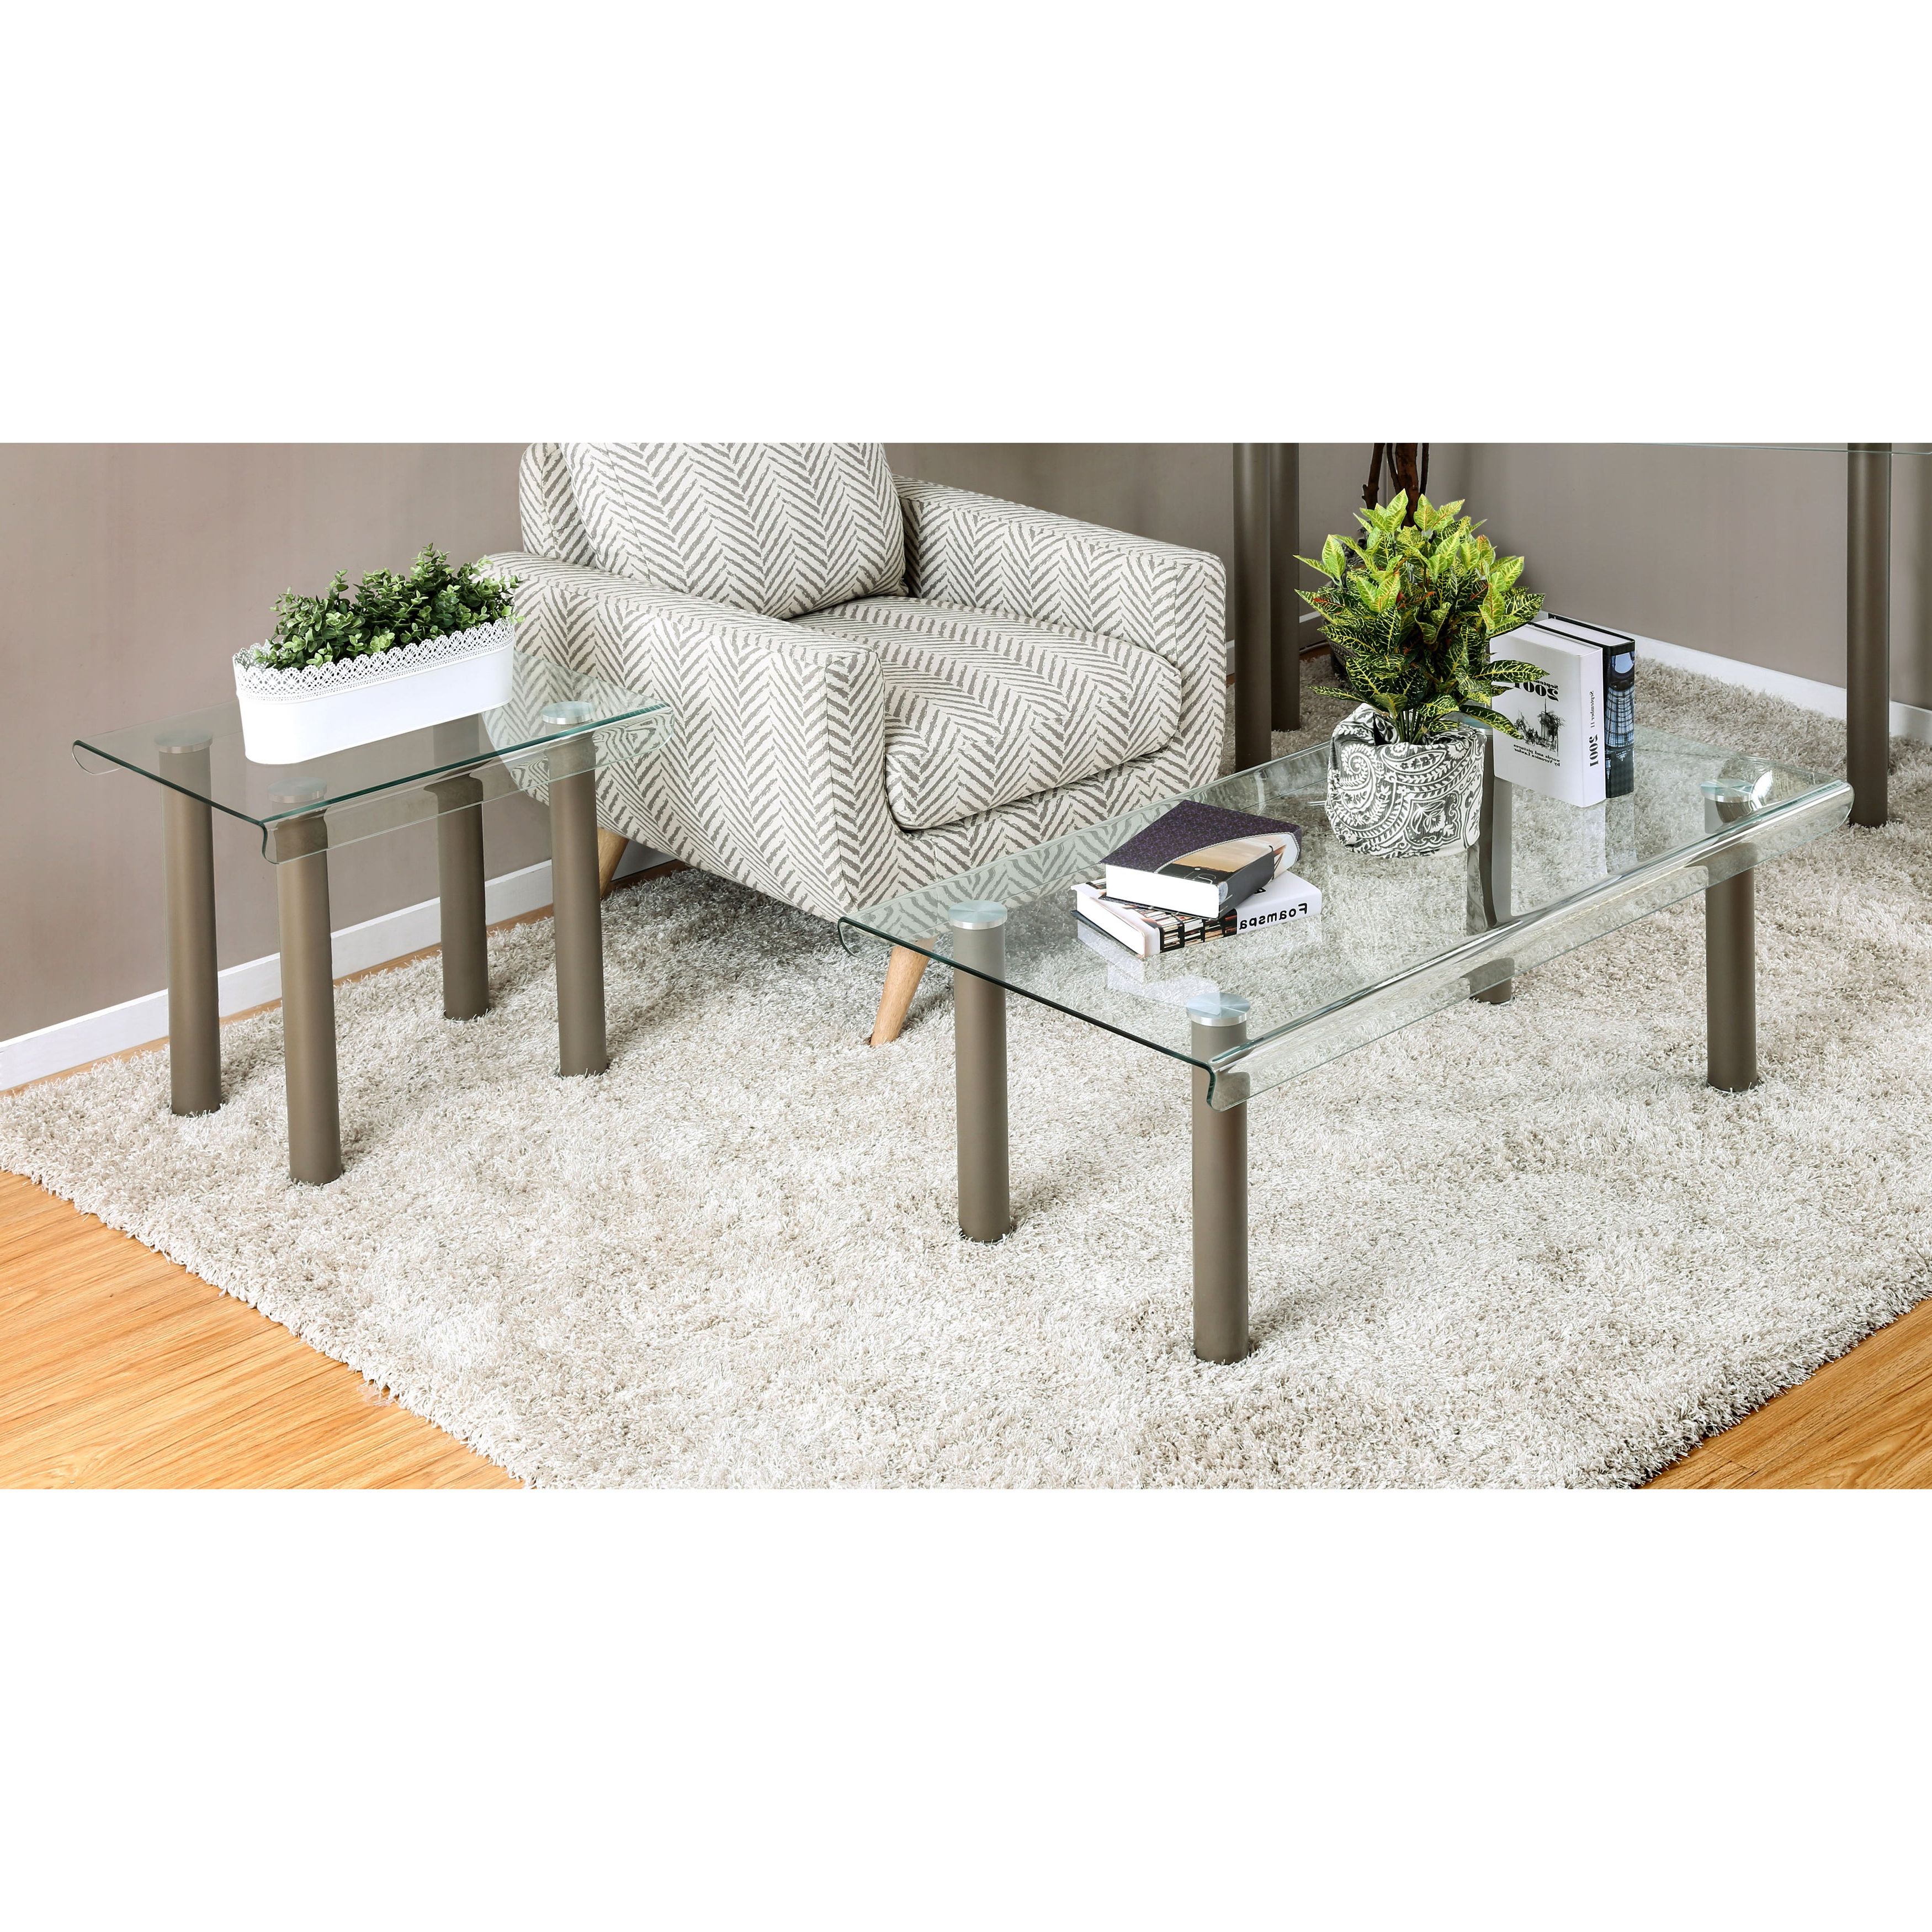 Creme Contemporary Champagne 2 Piece Glass Top Accent Table Setfoa Pertaining To Latest Mishie Contemporary Champagne 2 Piece Accent Tables Set By Foa (View 9 of 20)